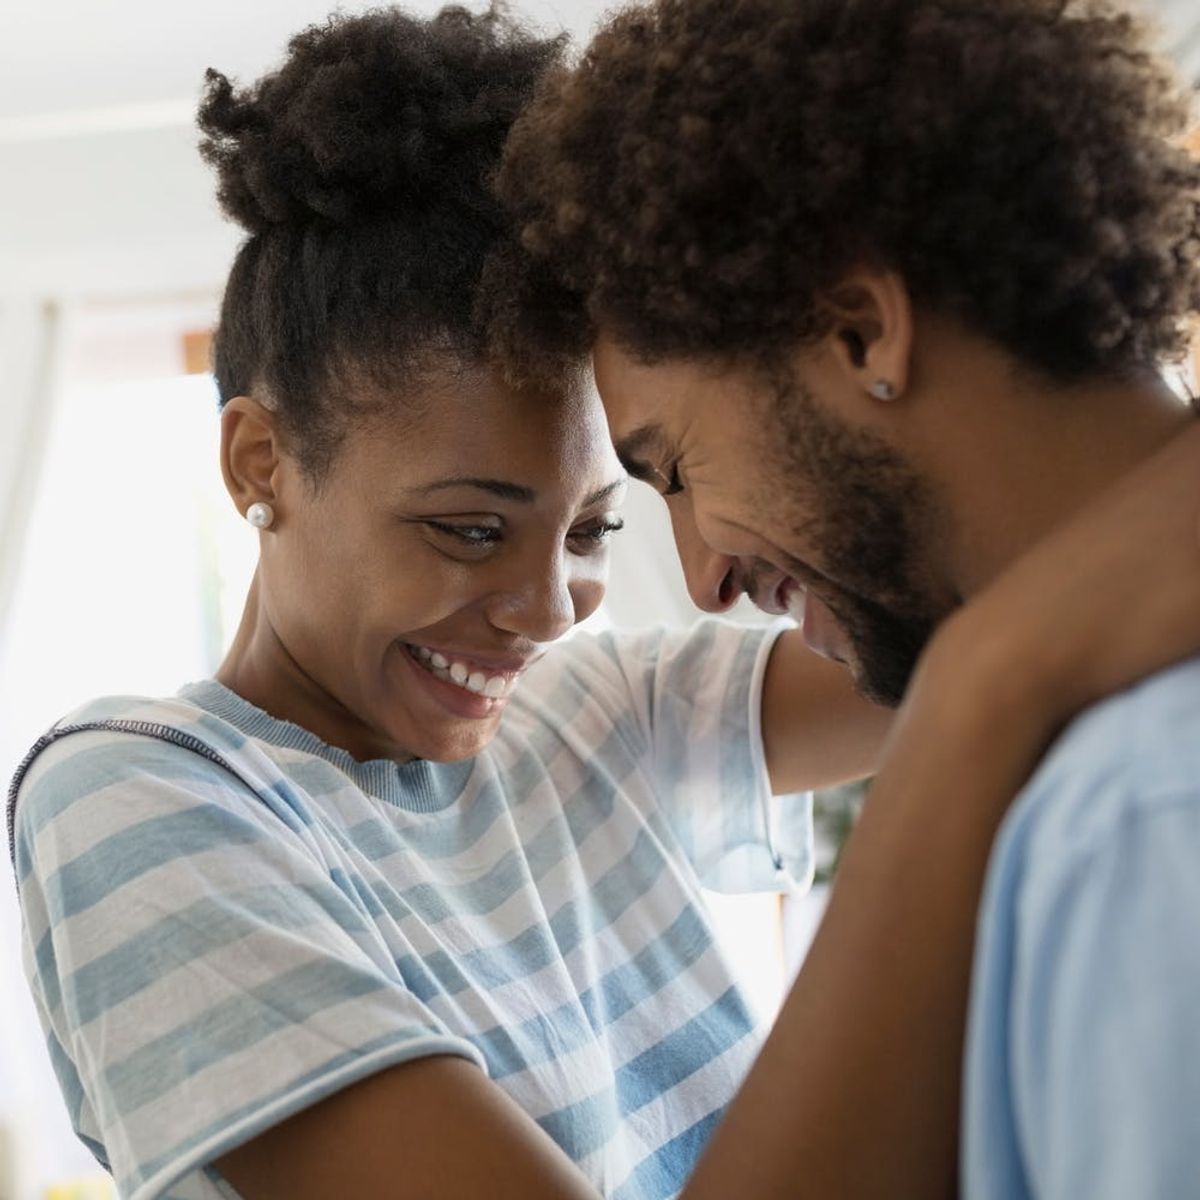 Believe It or Not, Your Birth Control Can Affect Who You’re Attracted To